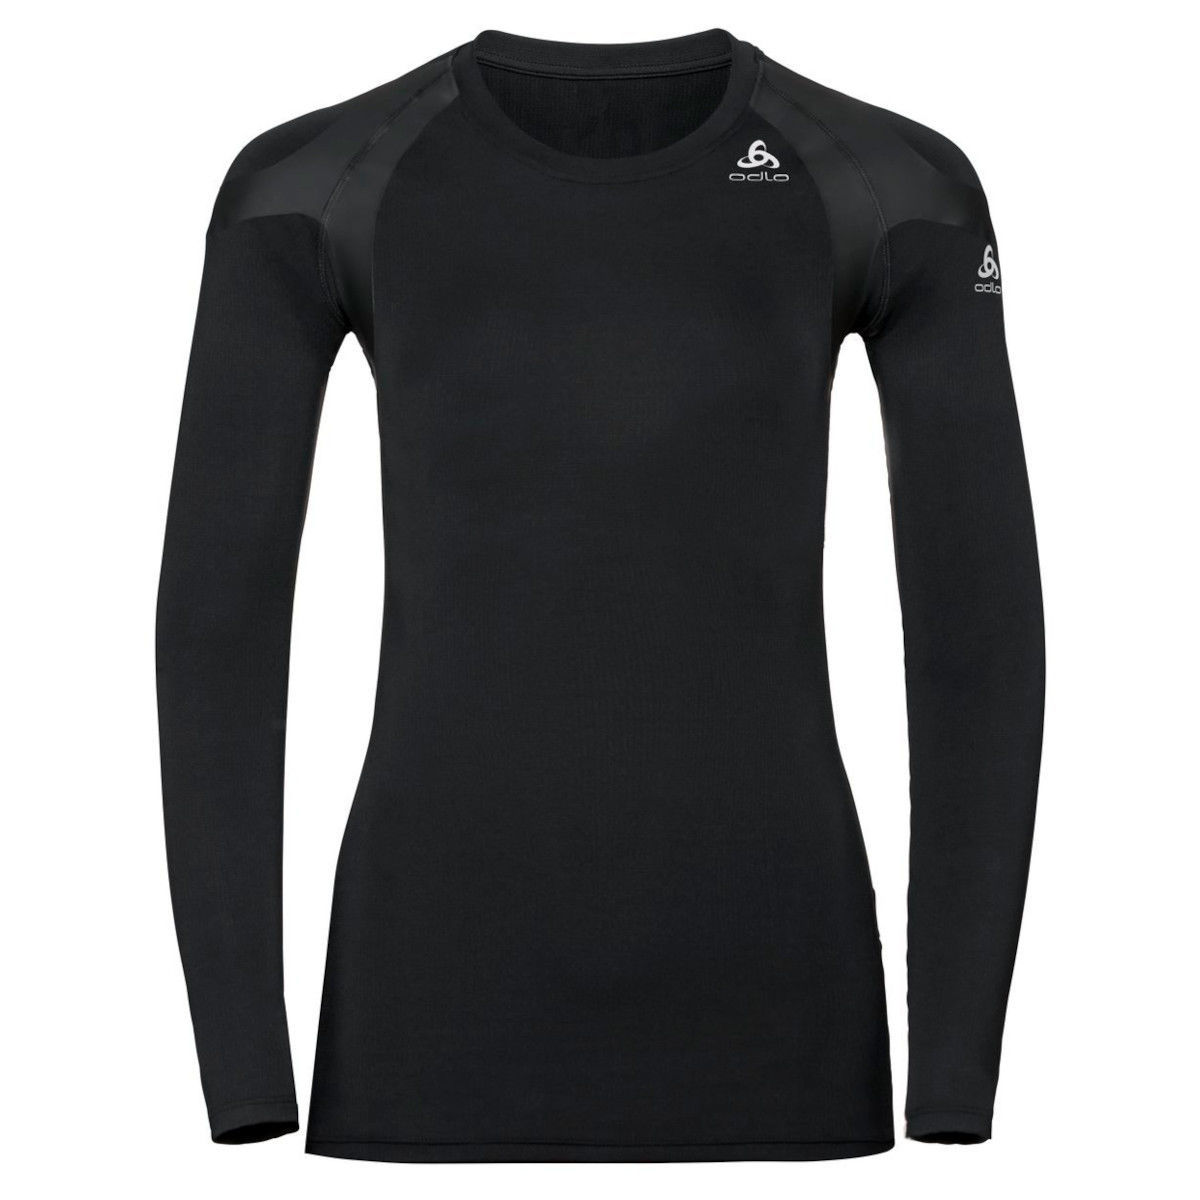 Odlo Active Spine Light L/S Base Layer Top Women's Base Layer in Black